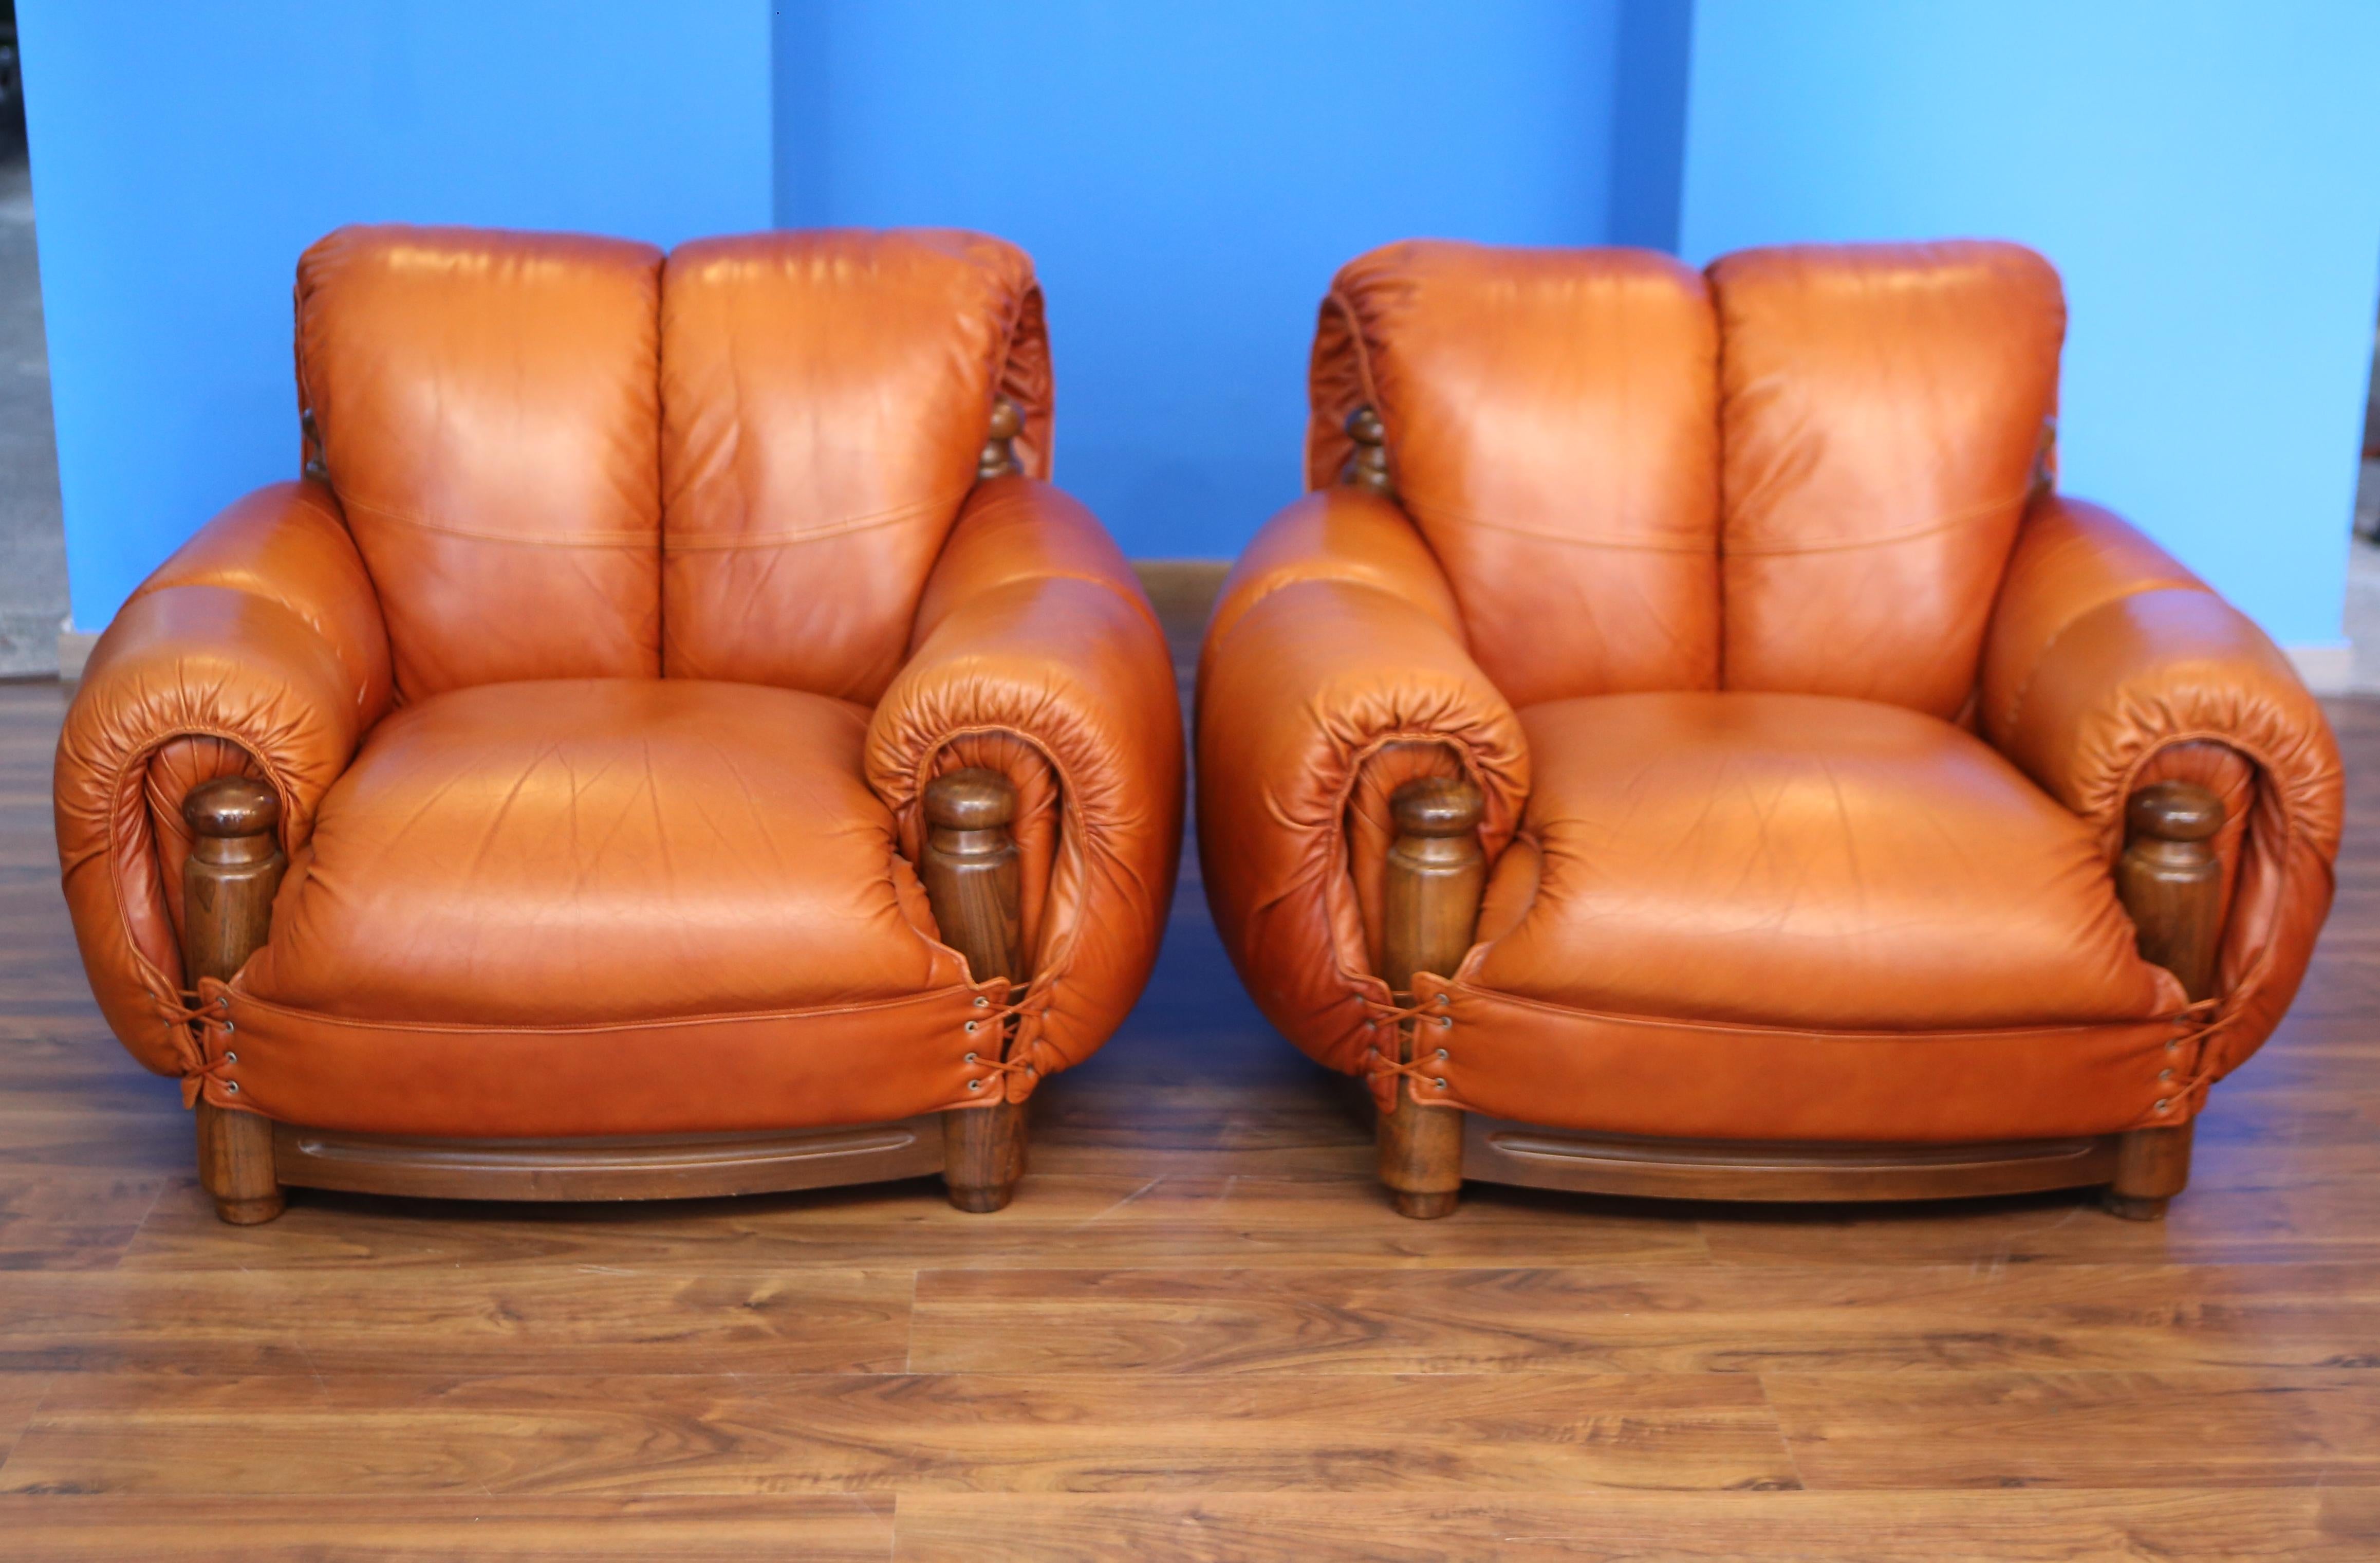 set of two leather armchairs cognac colored in the style of sergio rodriguez.
These armchairs are in exceptional condition, the cognac colored leather has no defects. ideal for open environments.